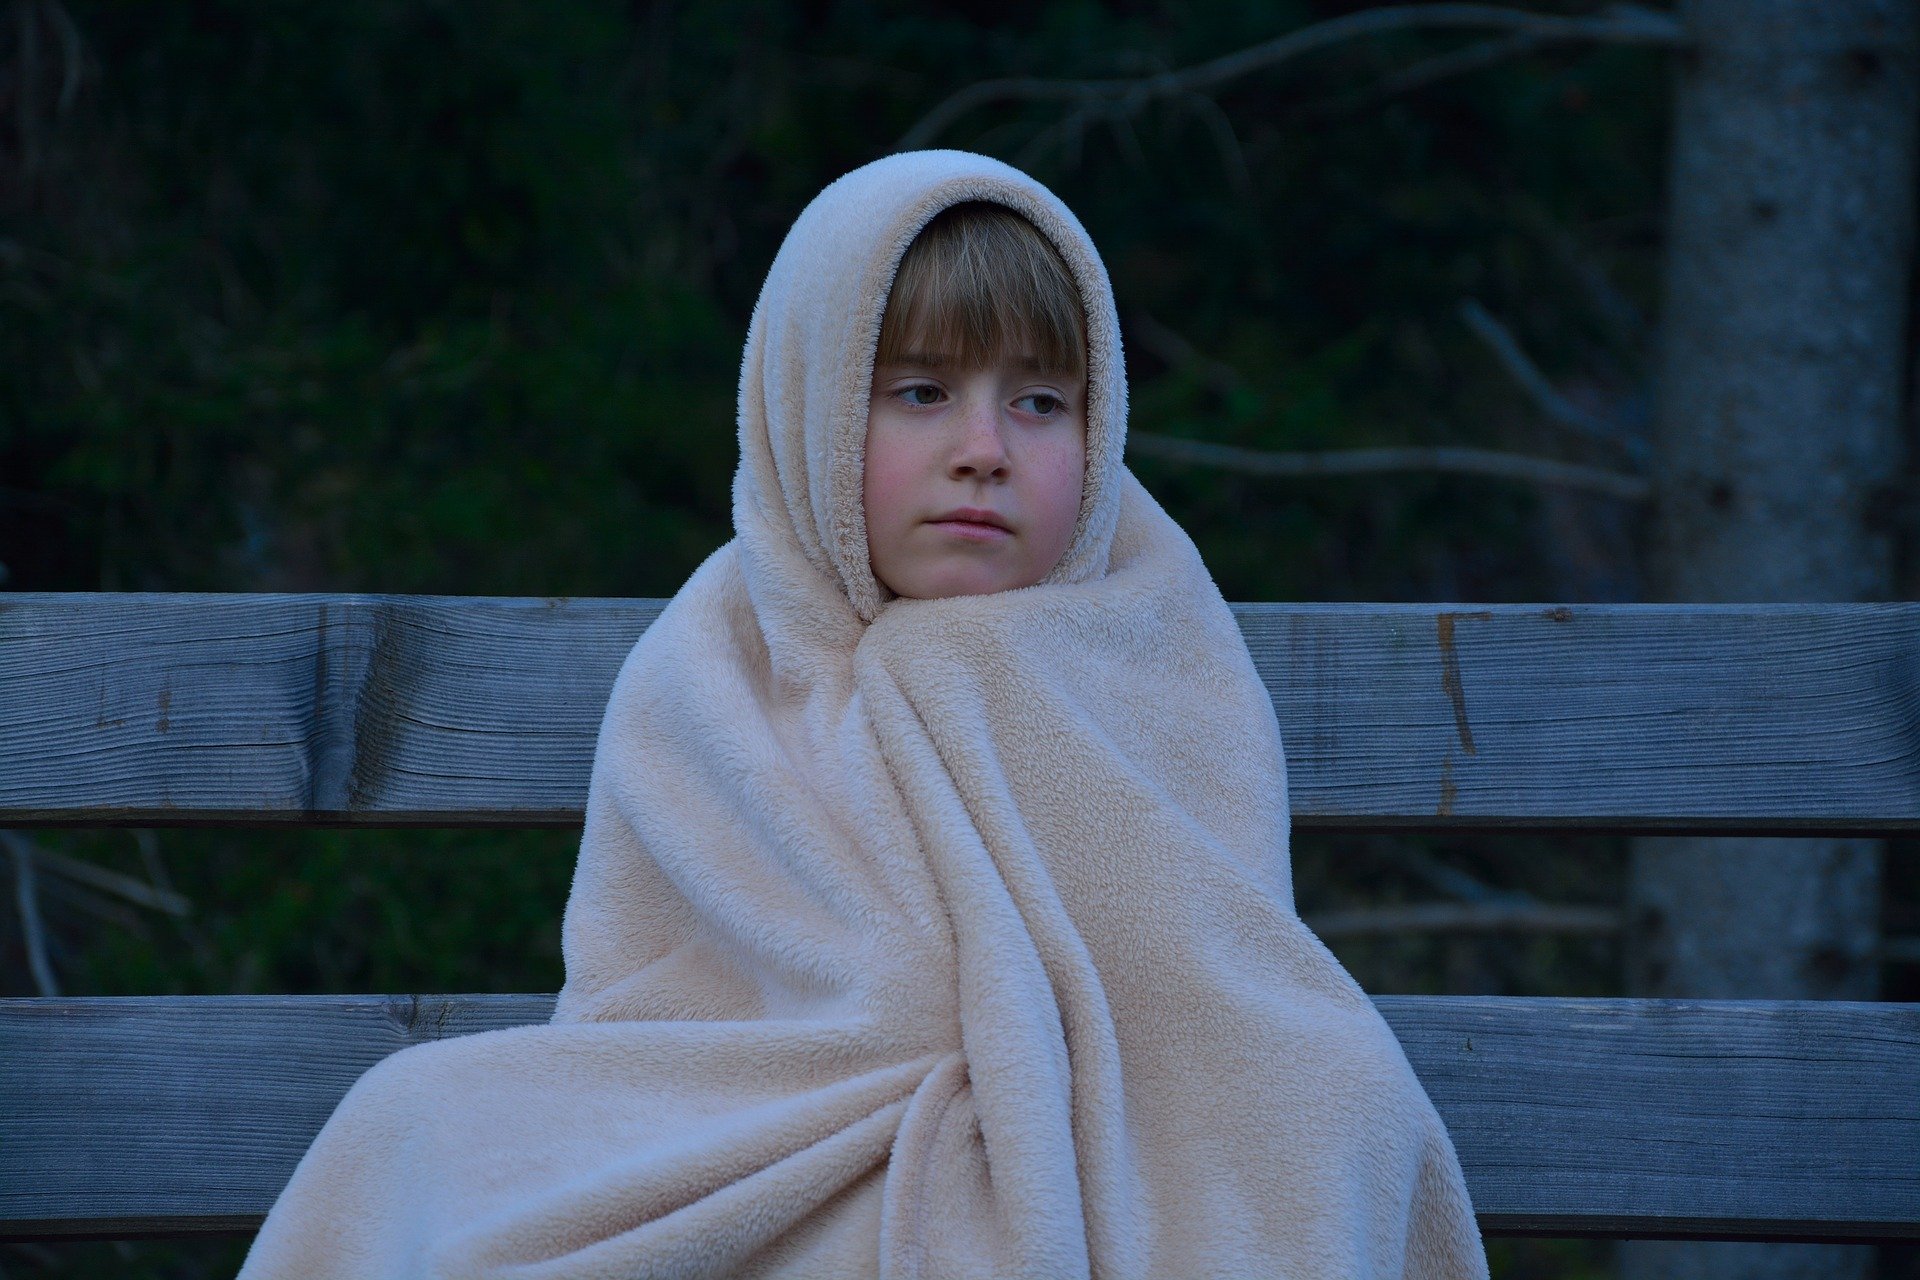 A child wearing a blanket sitting on top of a bench | Source: Pixabay